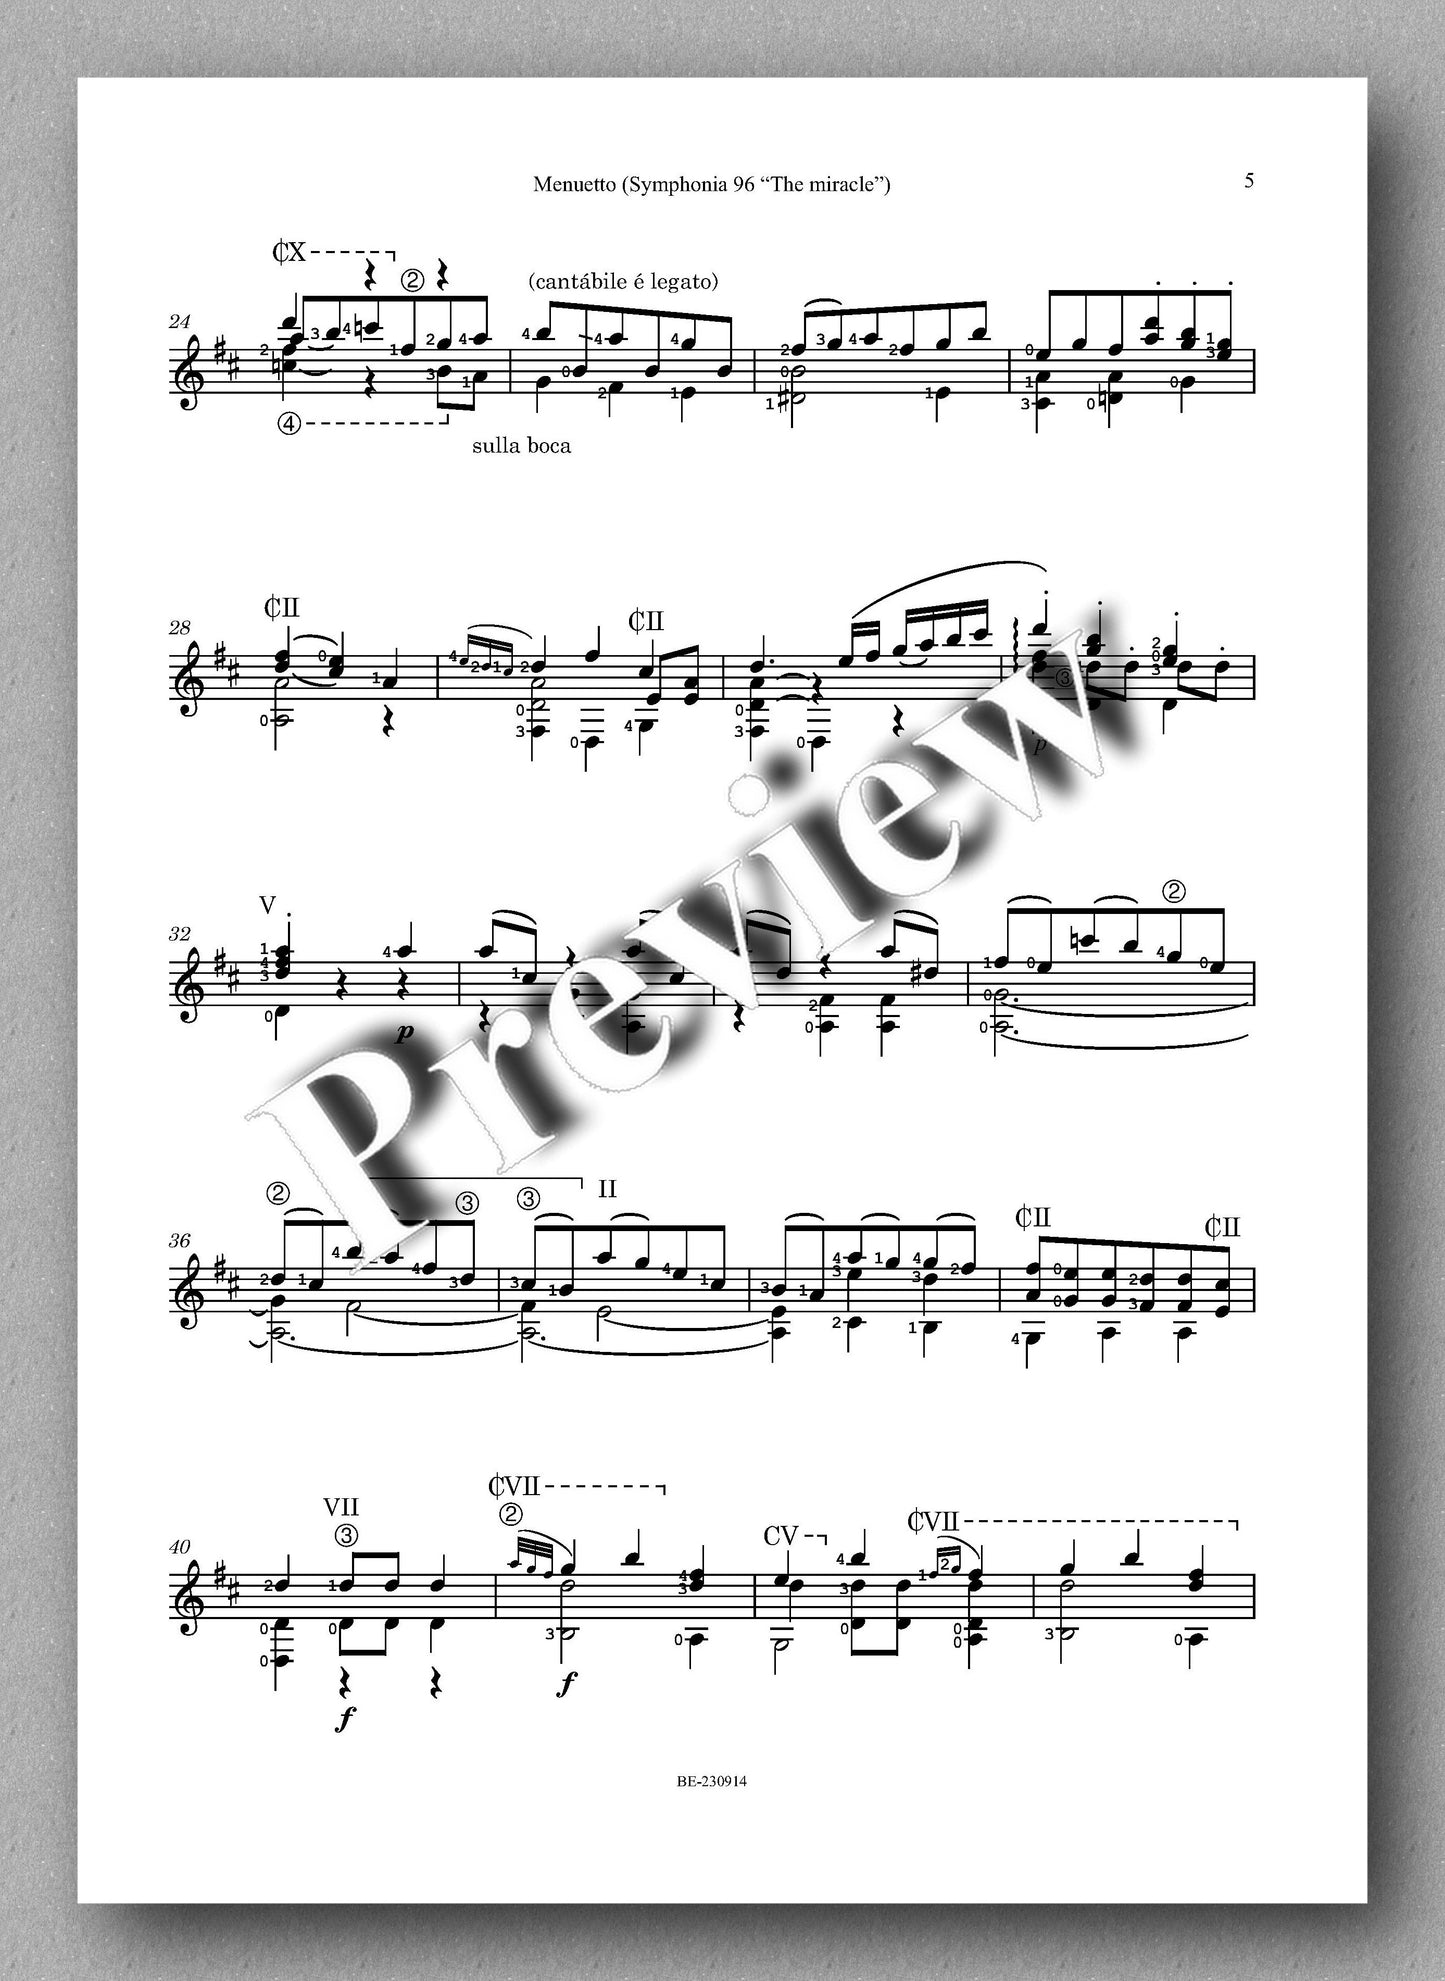 Haydn-Palacios, Menuetto - preview of the music score 2